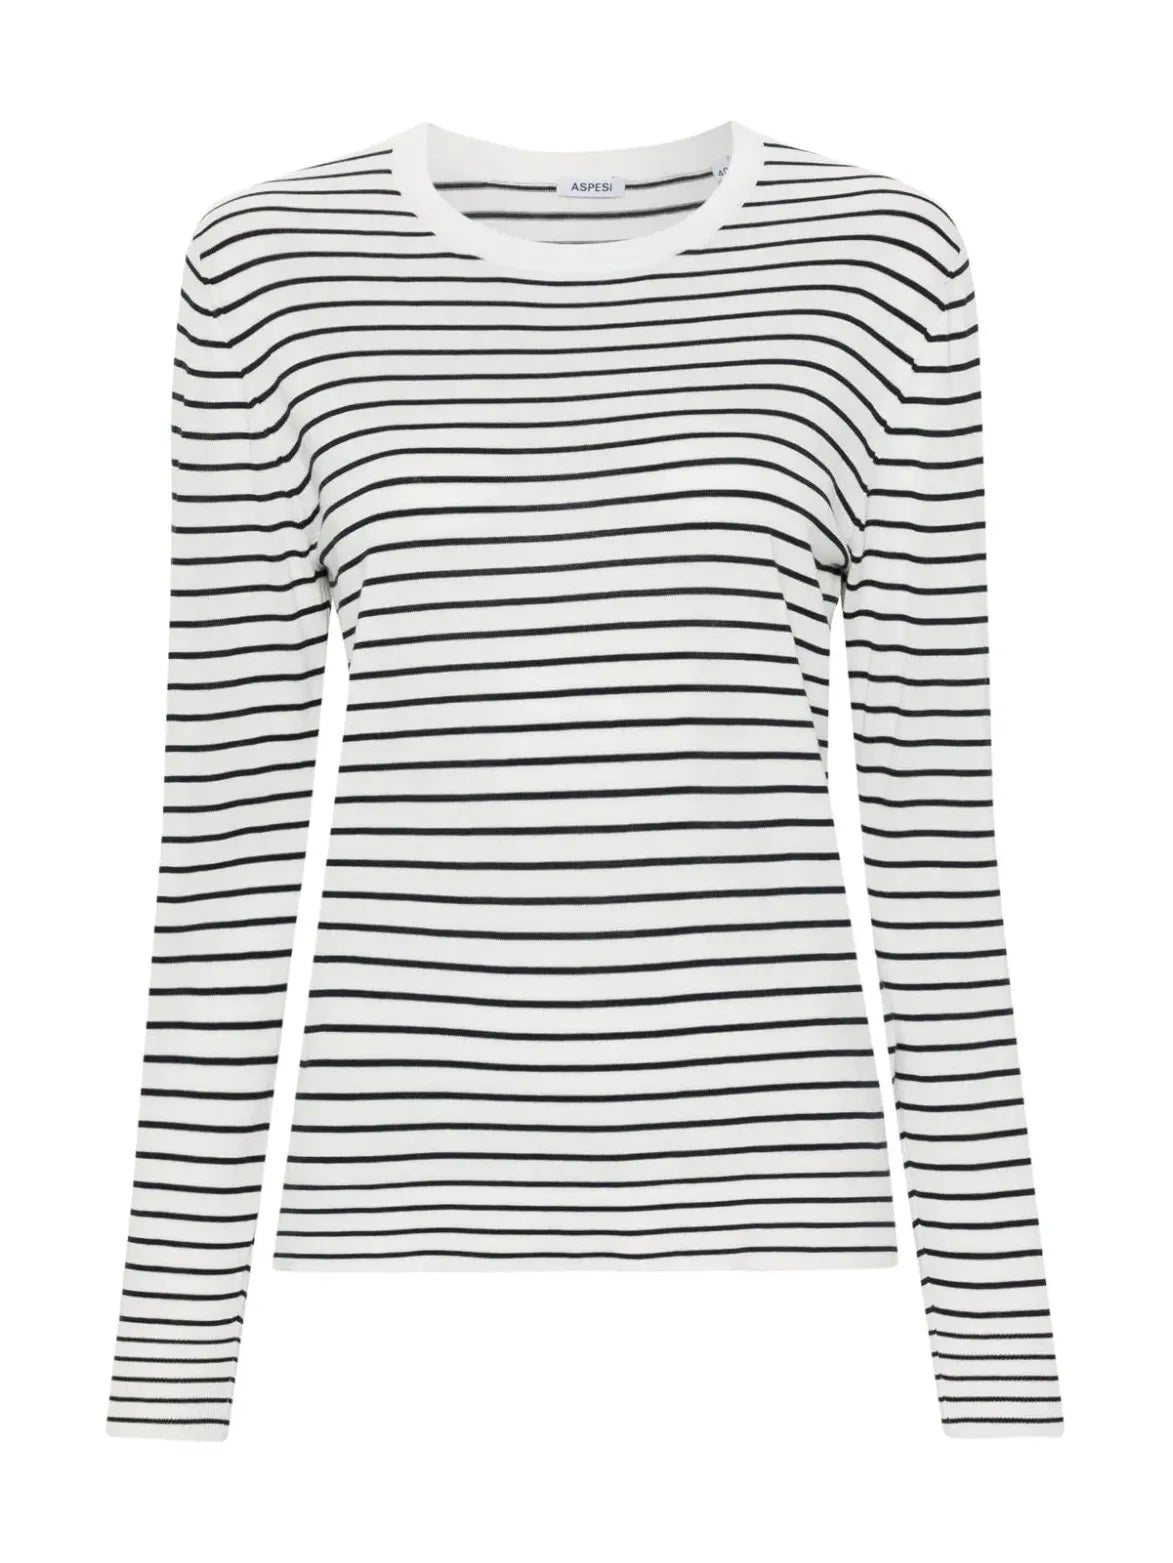 Striped knitted cotton shirt, white/navy